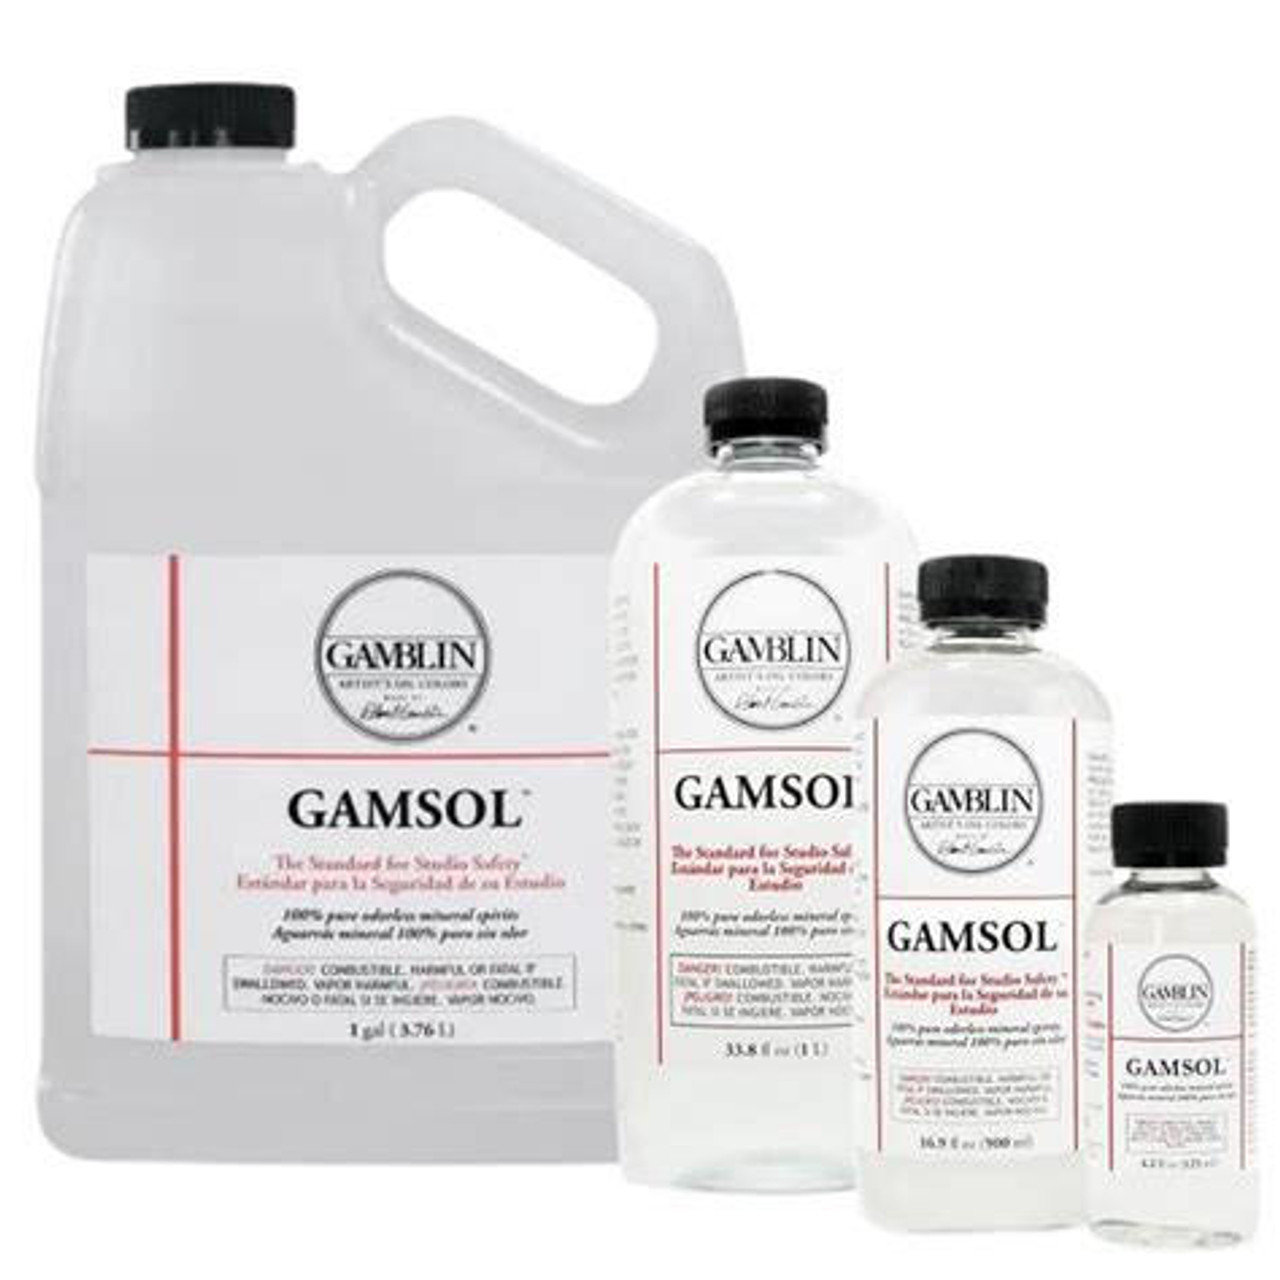 gamsol is always in full stock in this house! my most useful painting